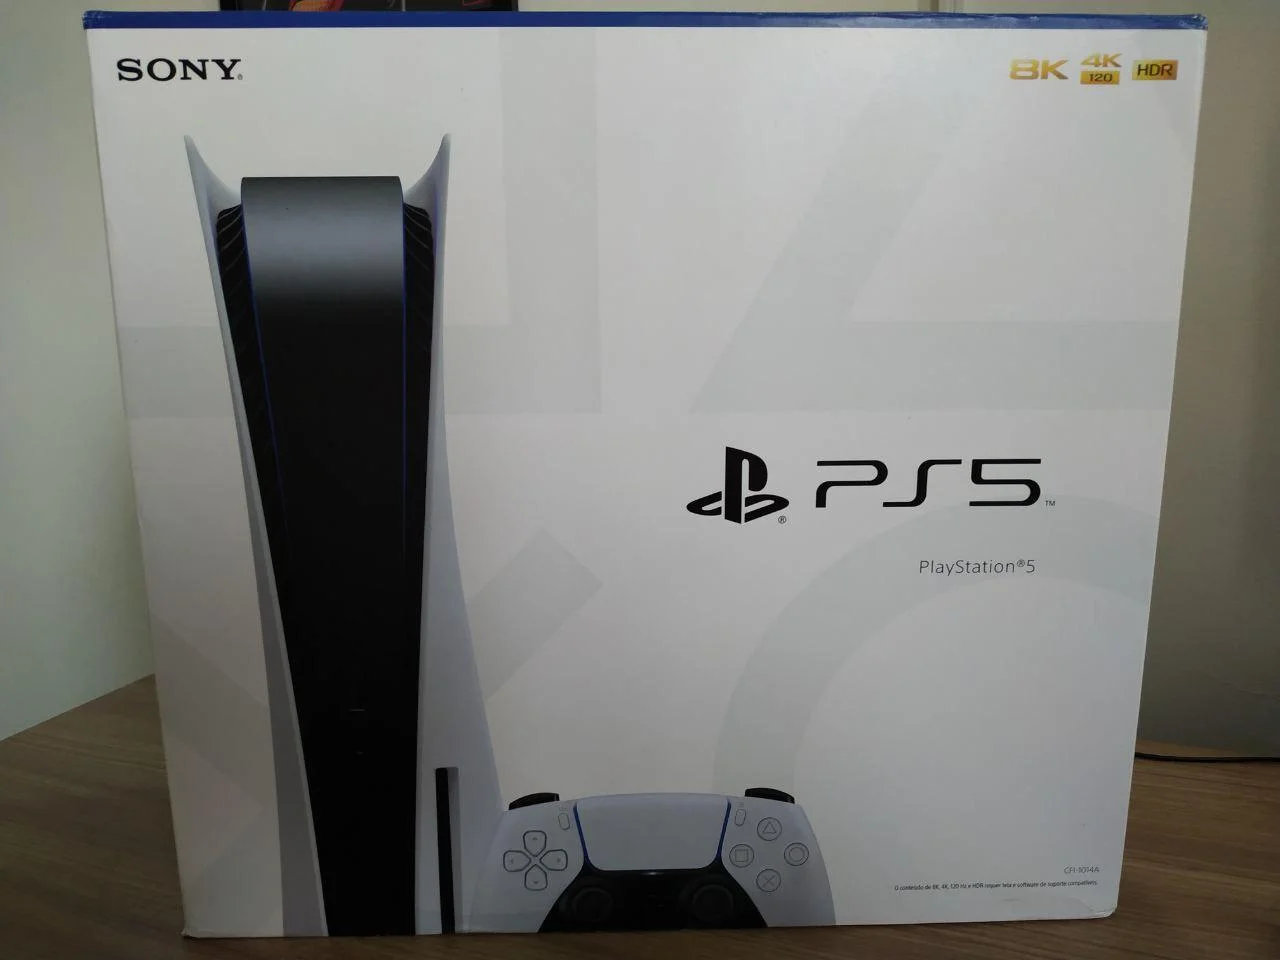  Sony PlayStation 5 Console [BR]